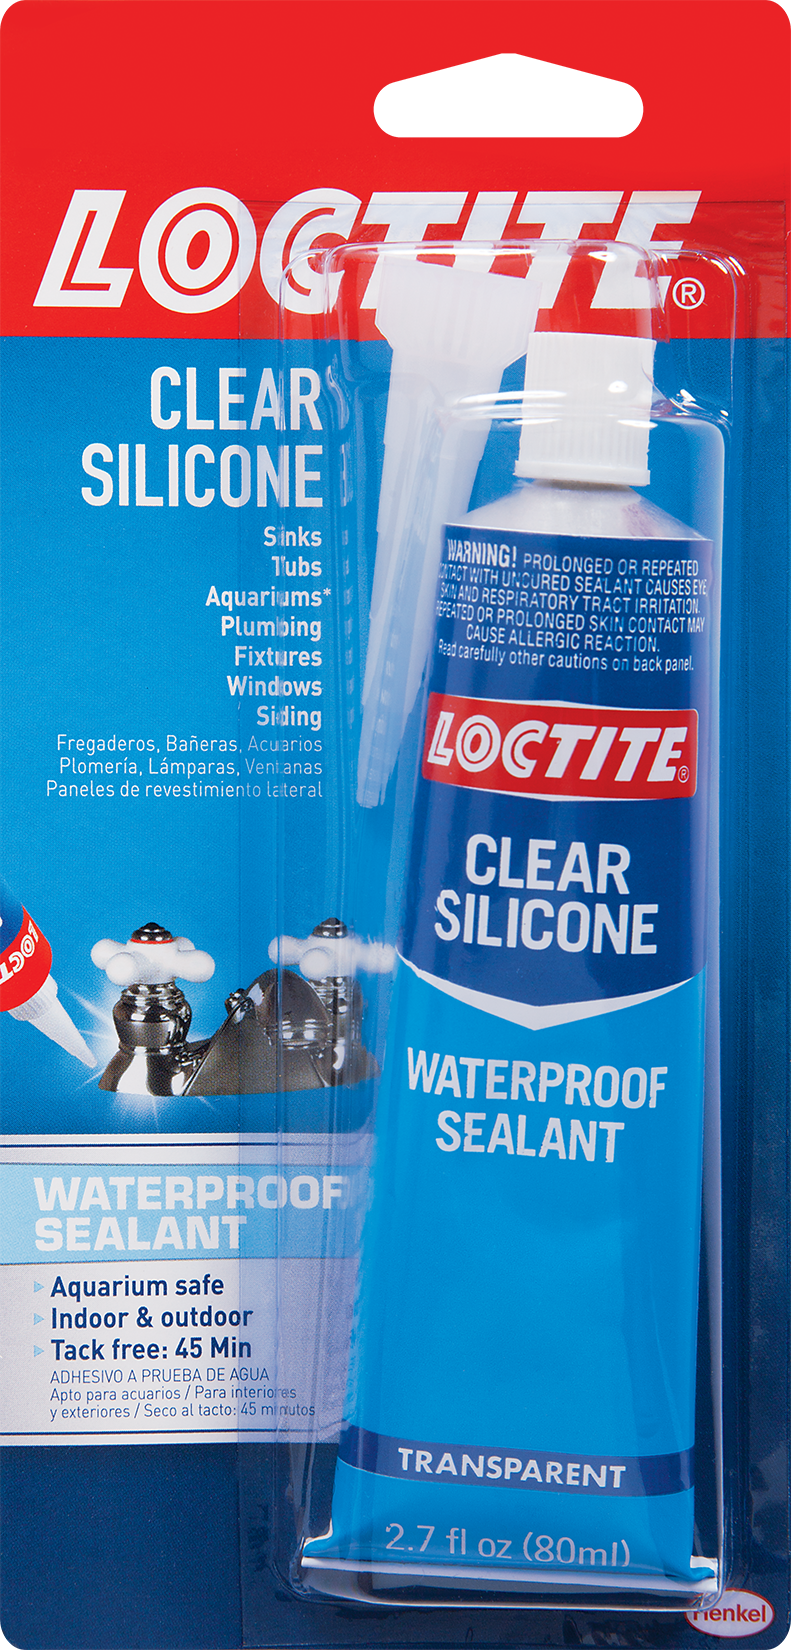 Bond It Silicone Release Spray - 500ml(Pack of 3)